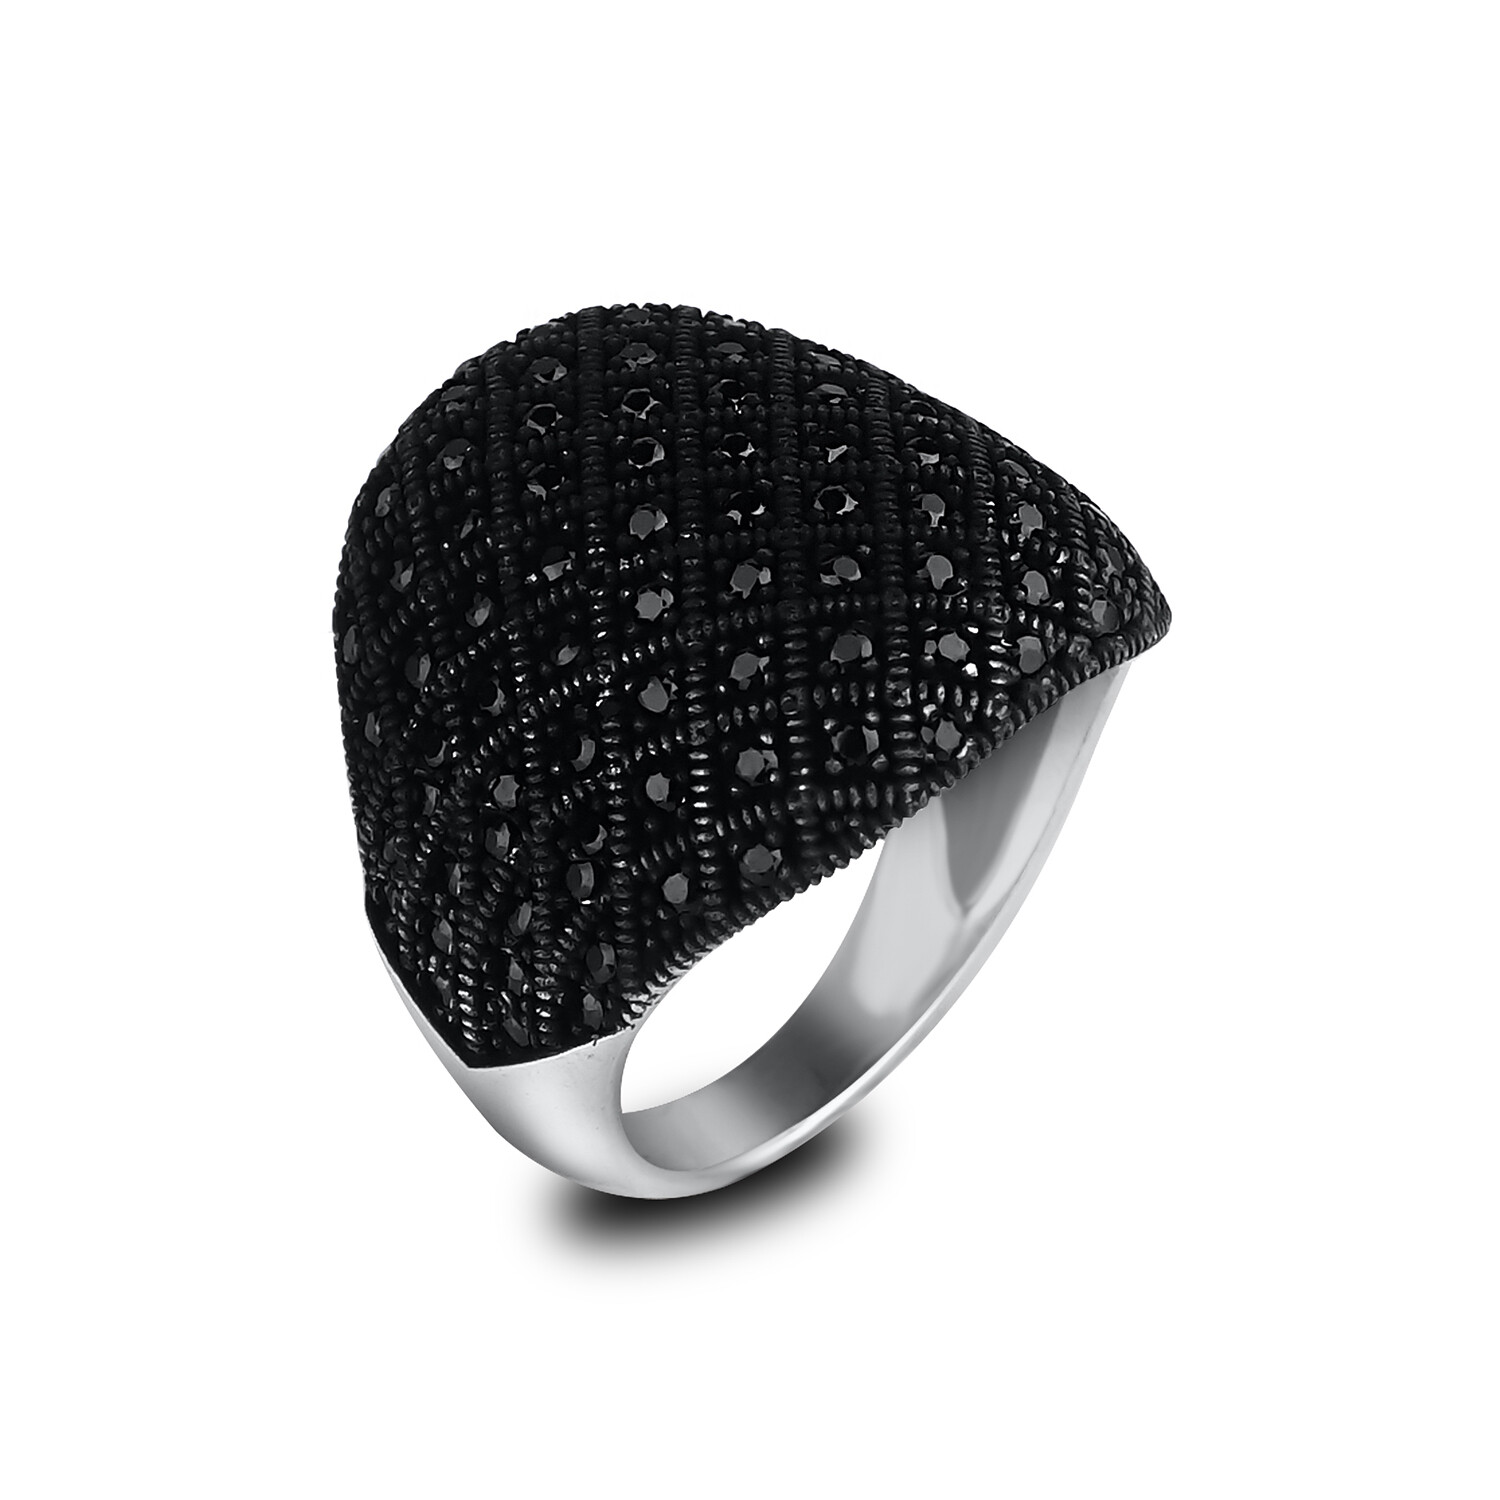 Pitch Black (8) - Ephesus Jewelry: Men's Rings - Touch of Modern